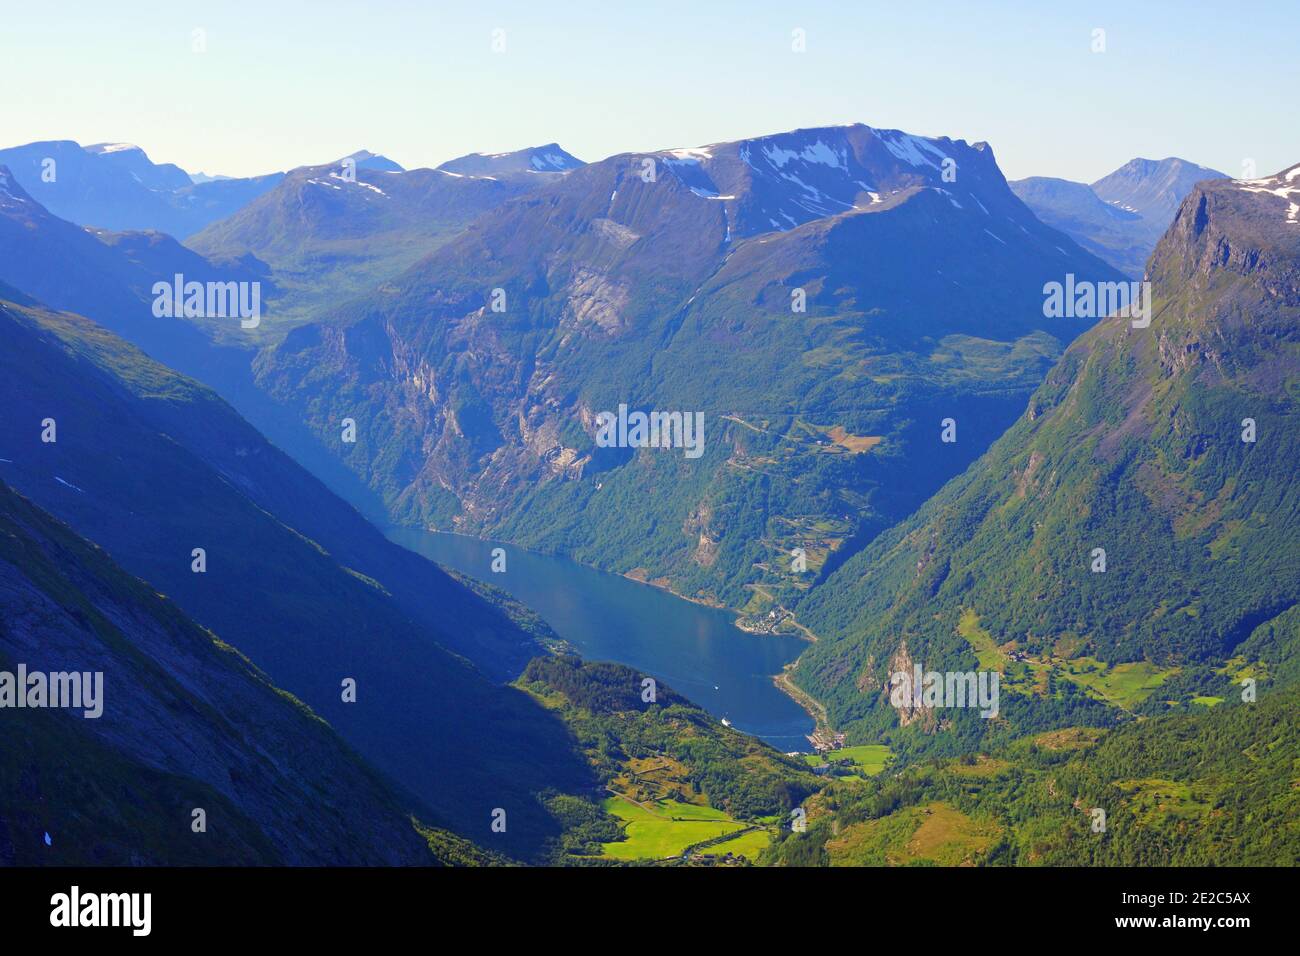 View from Dalsnibba Viewpoint in Geiranger, Norway. Stock Photo